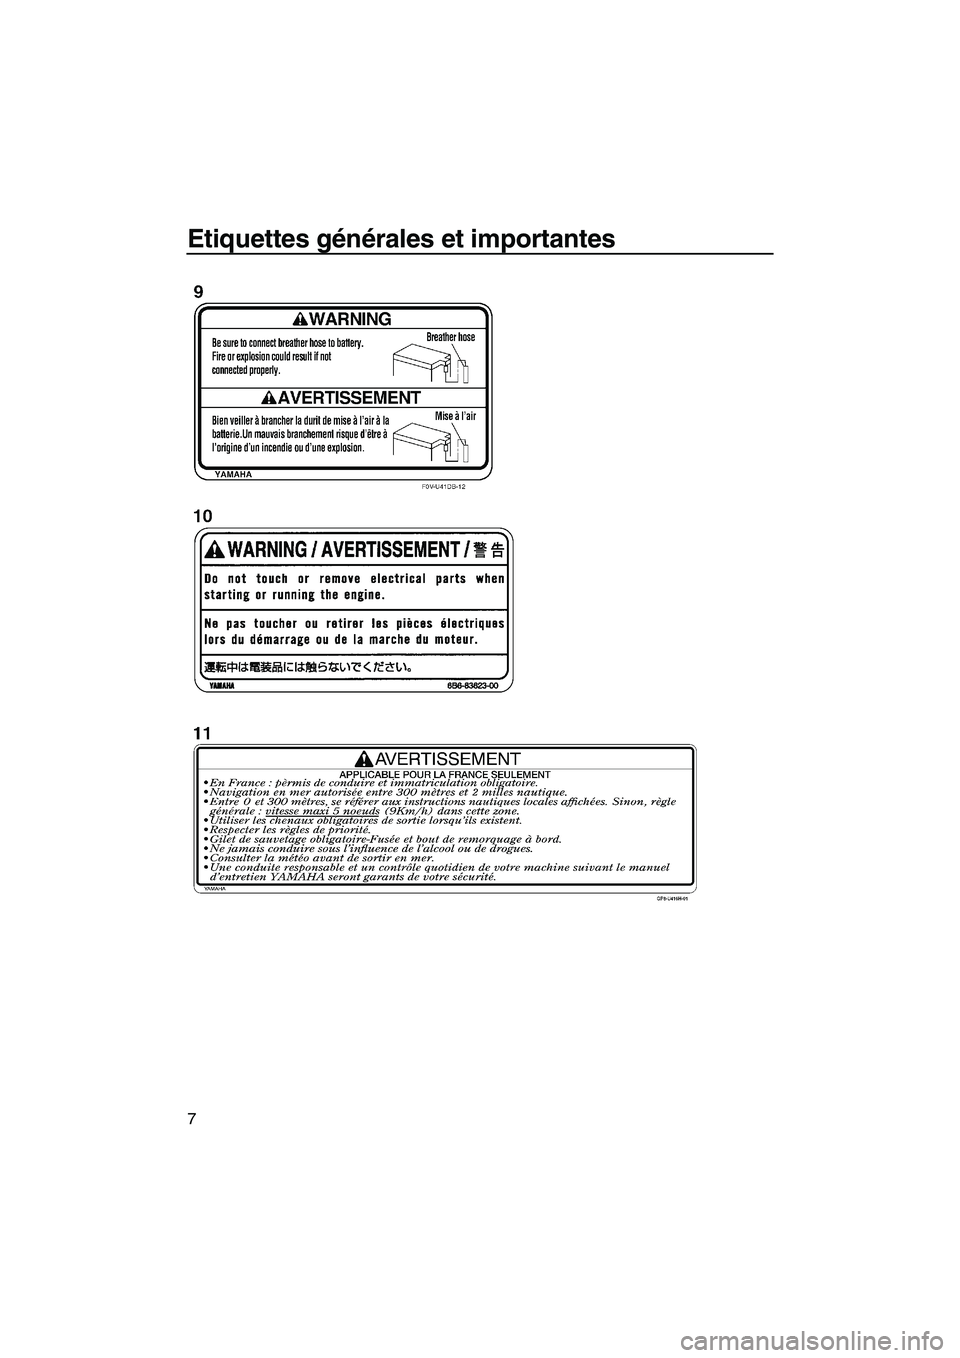 YAMAHA SVHO 2009  Notices Demploi (in French) Etiquettes générales et importantes
7
UF1W71F0.book  Page 7  Tuesday, July 1, 2008  9:44 AM 